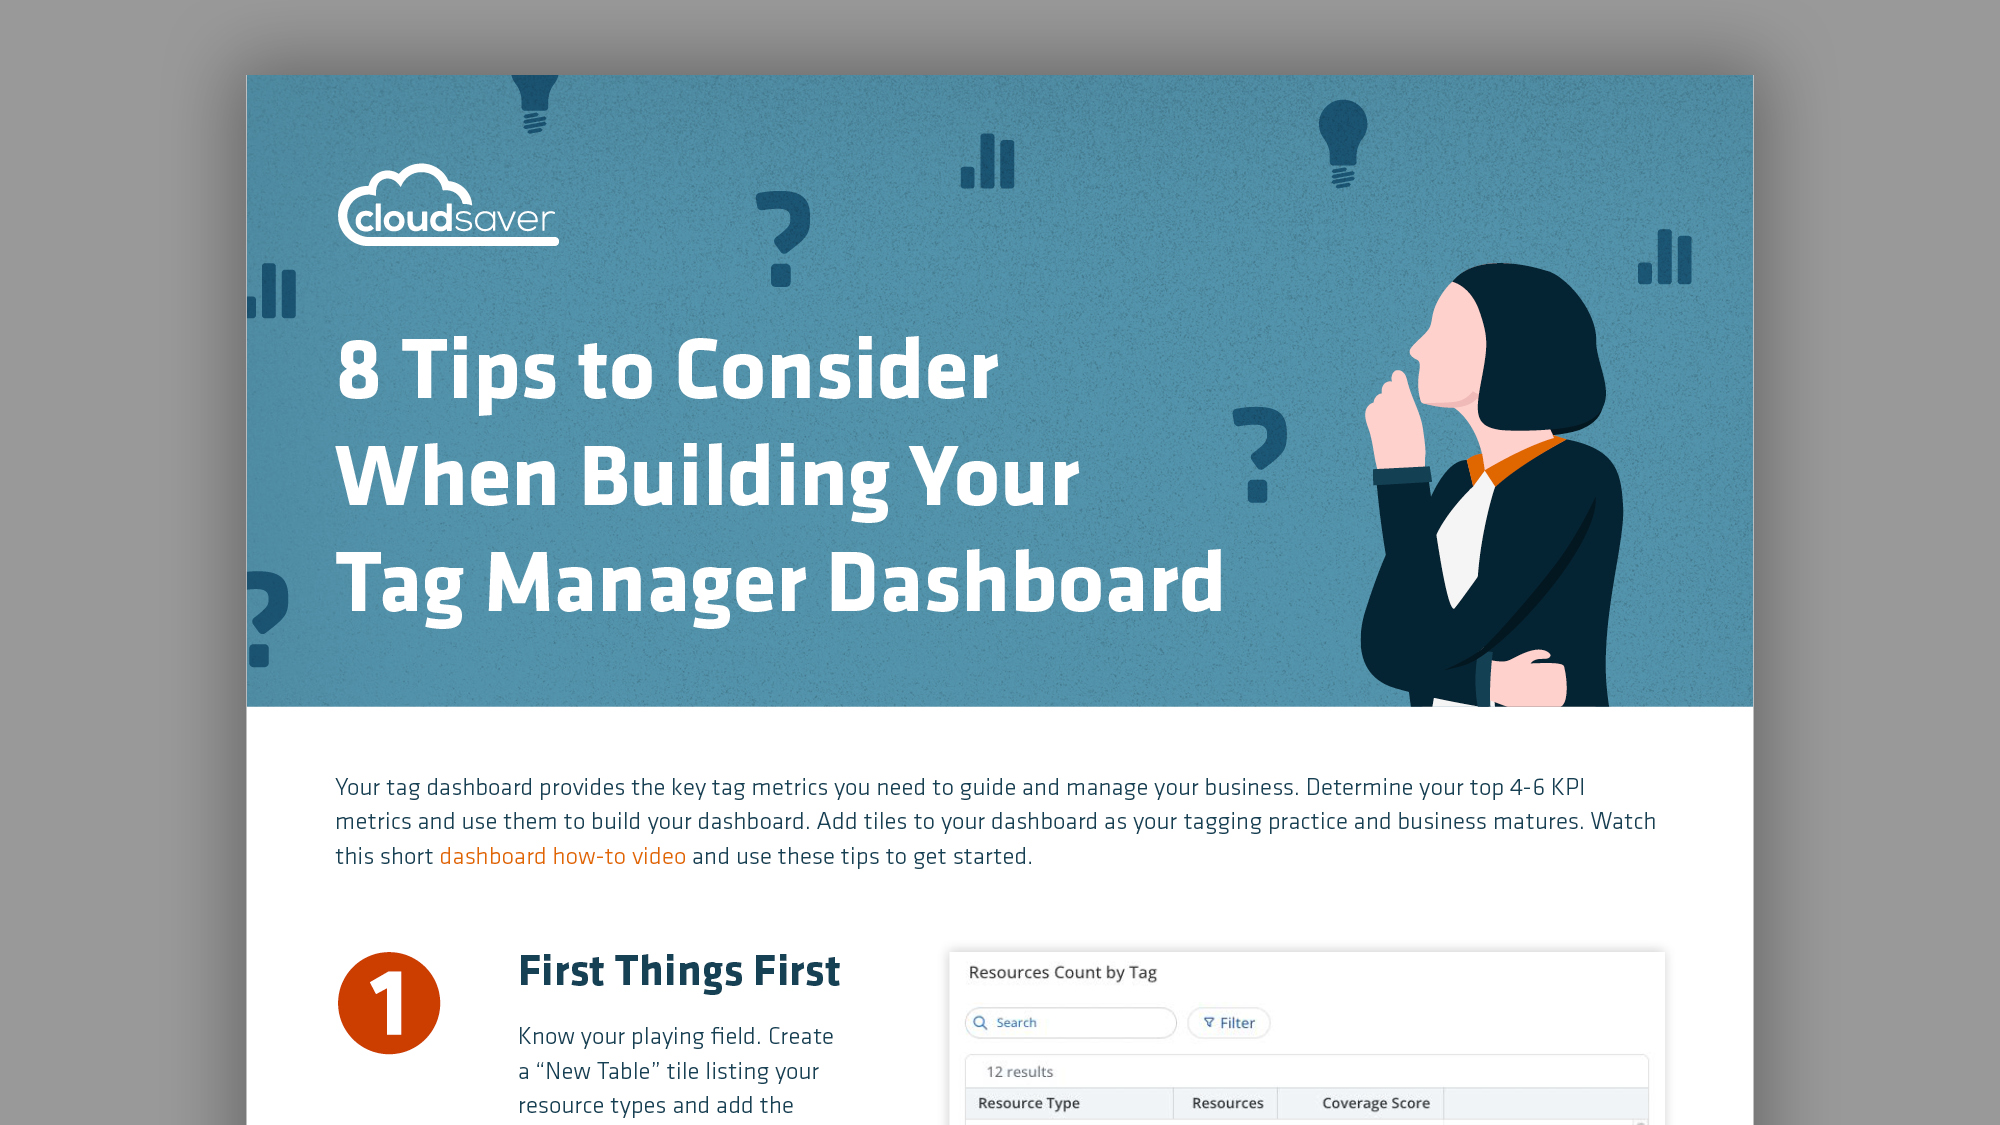 CloudSaver Tag Manager – 8 Tips to Consider When Building Your Tag Manager Dashboard